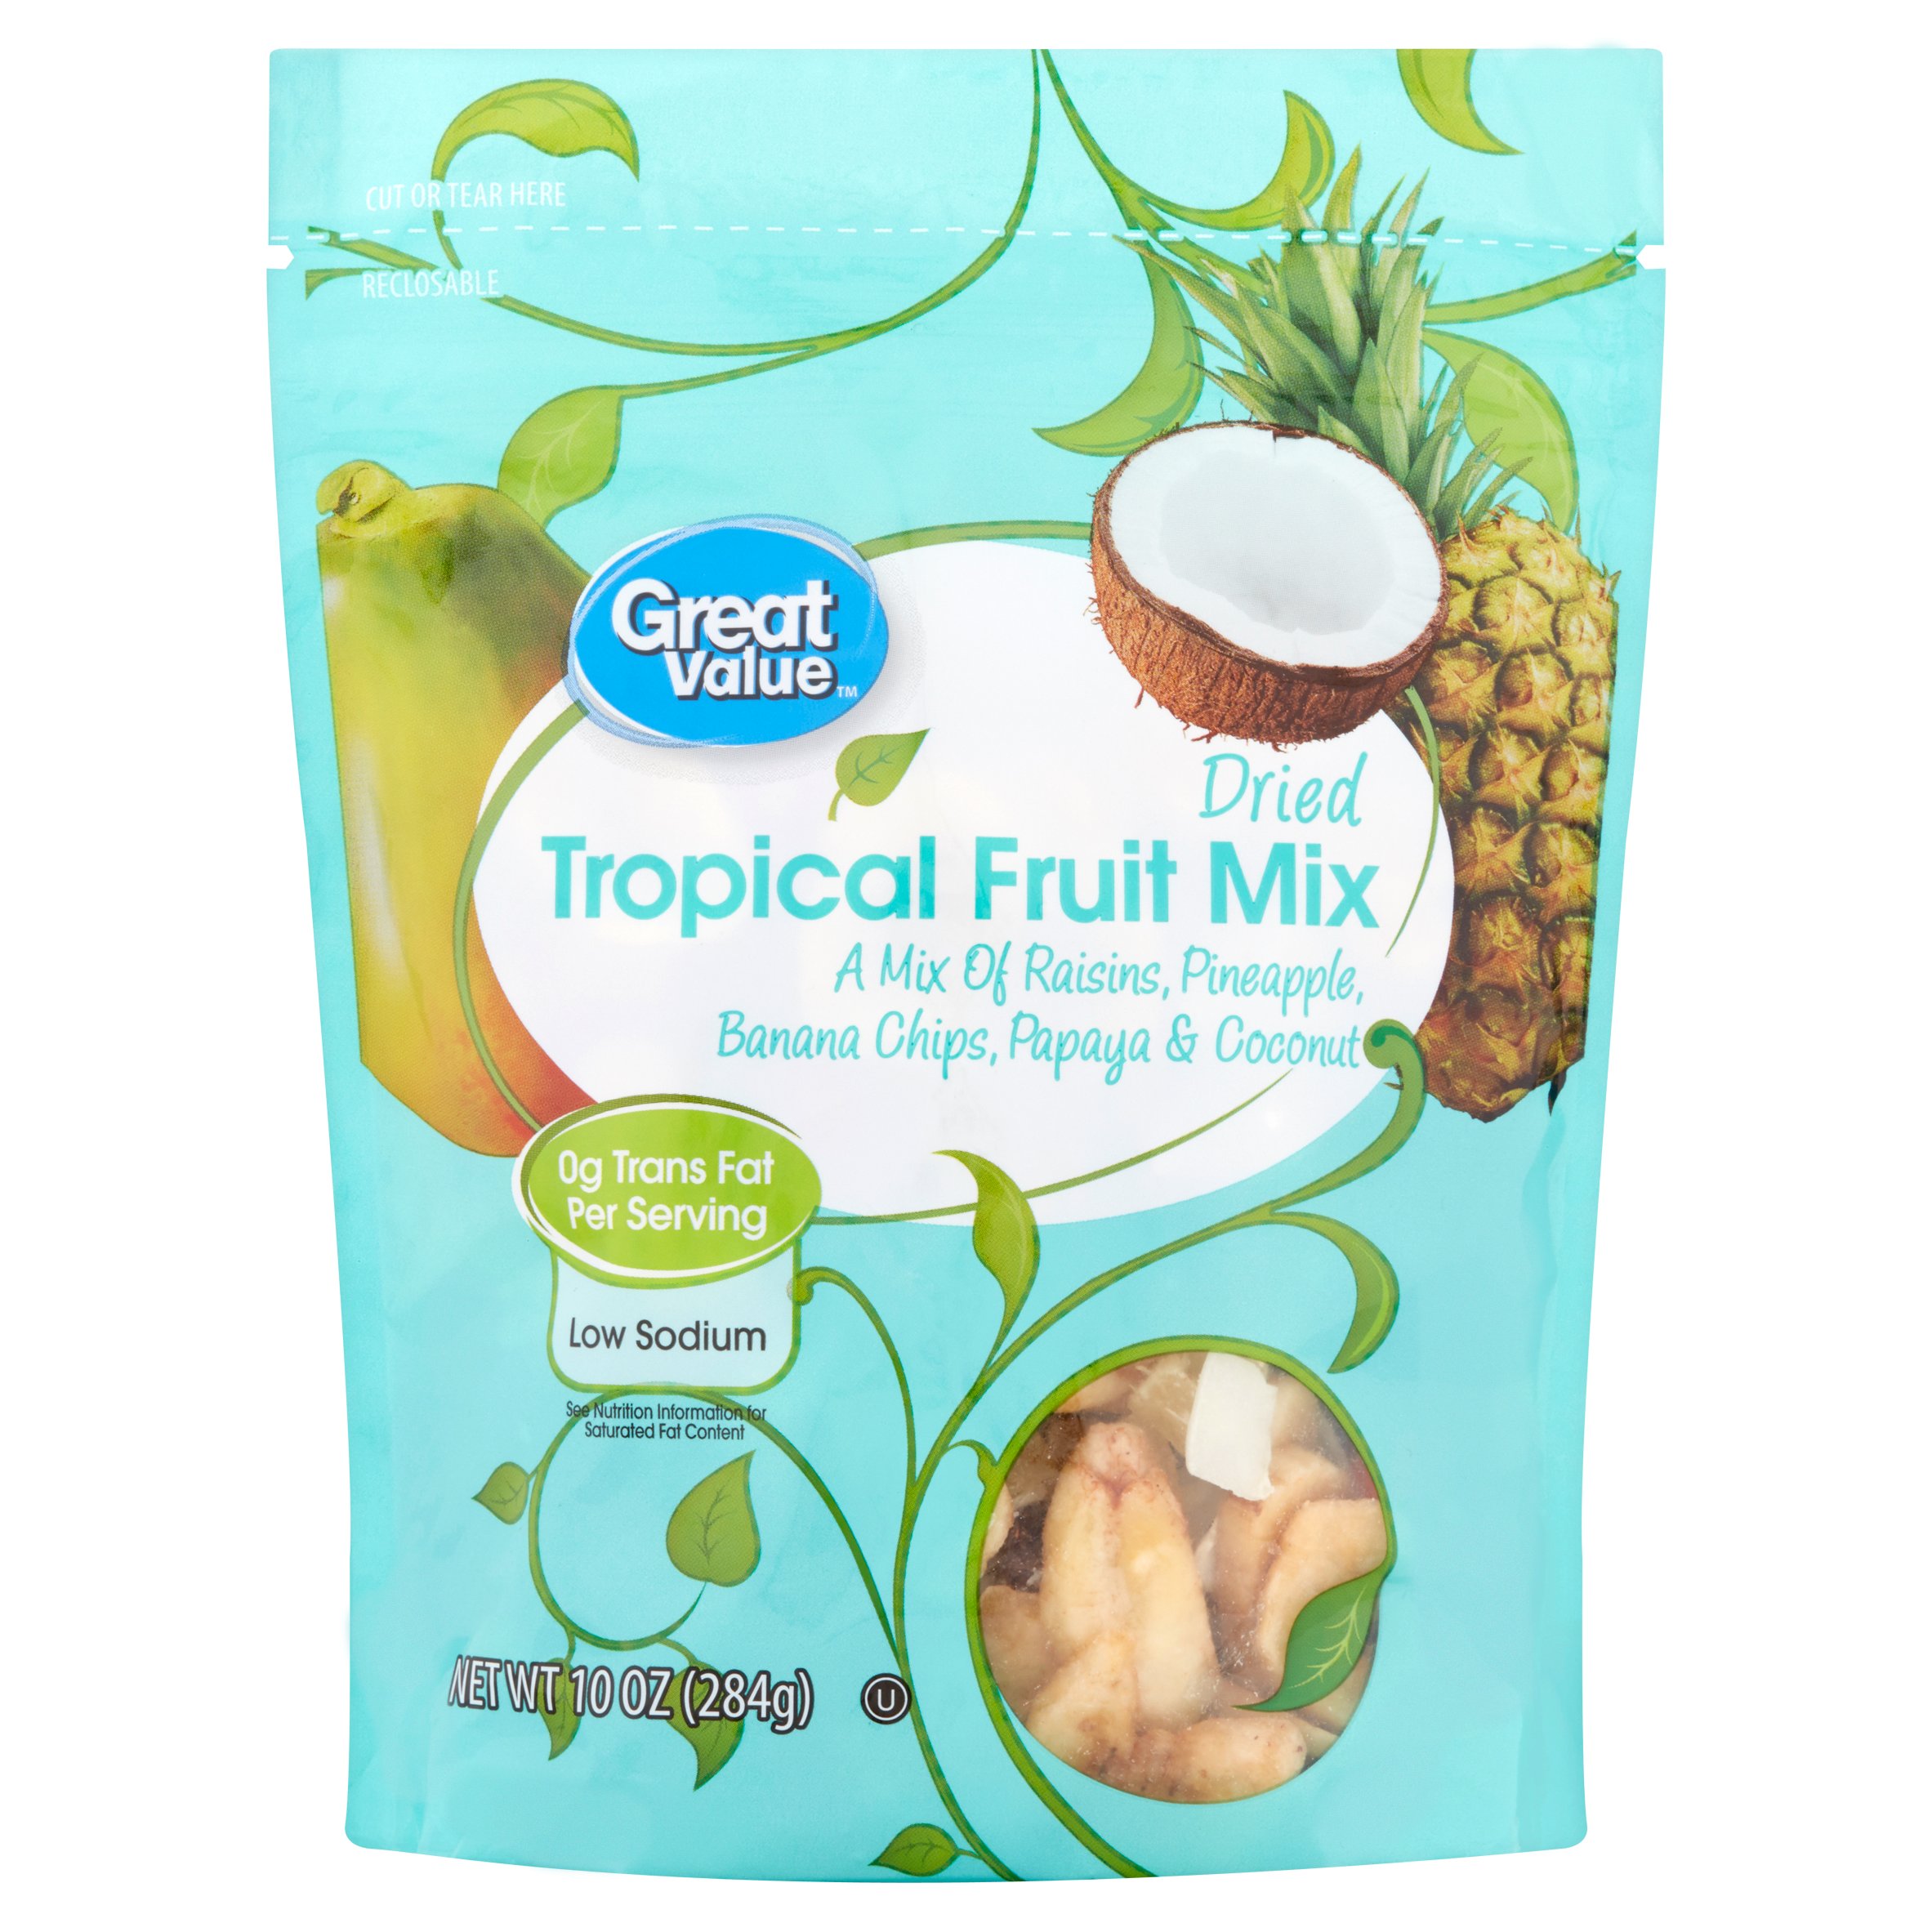 Great Value Dried Tropical Fruit Mix, 10 Oz. Image